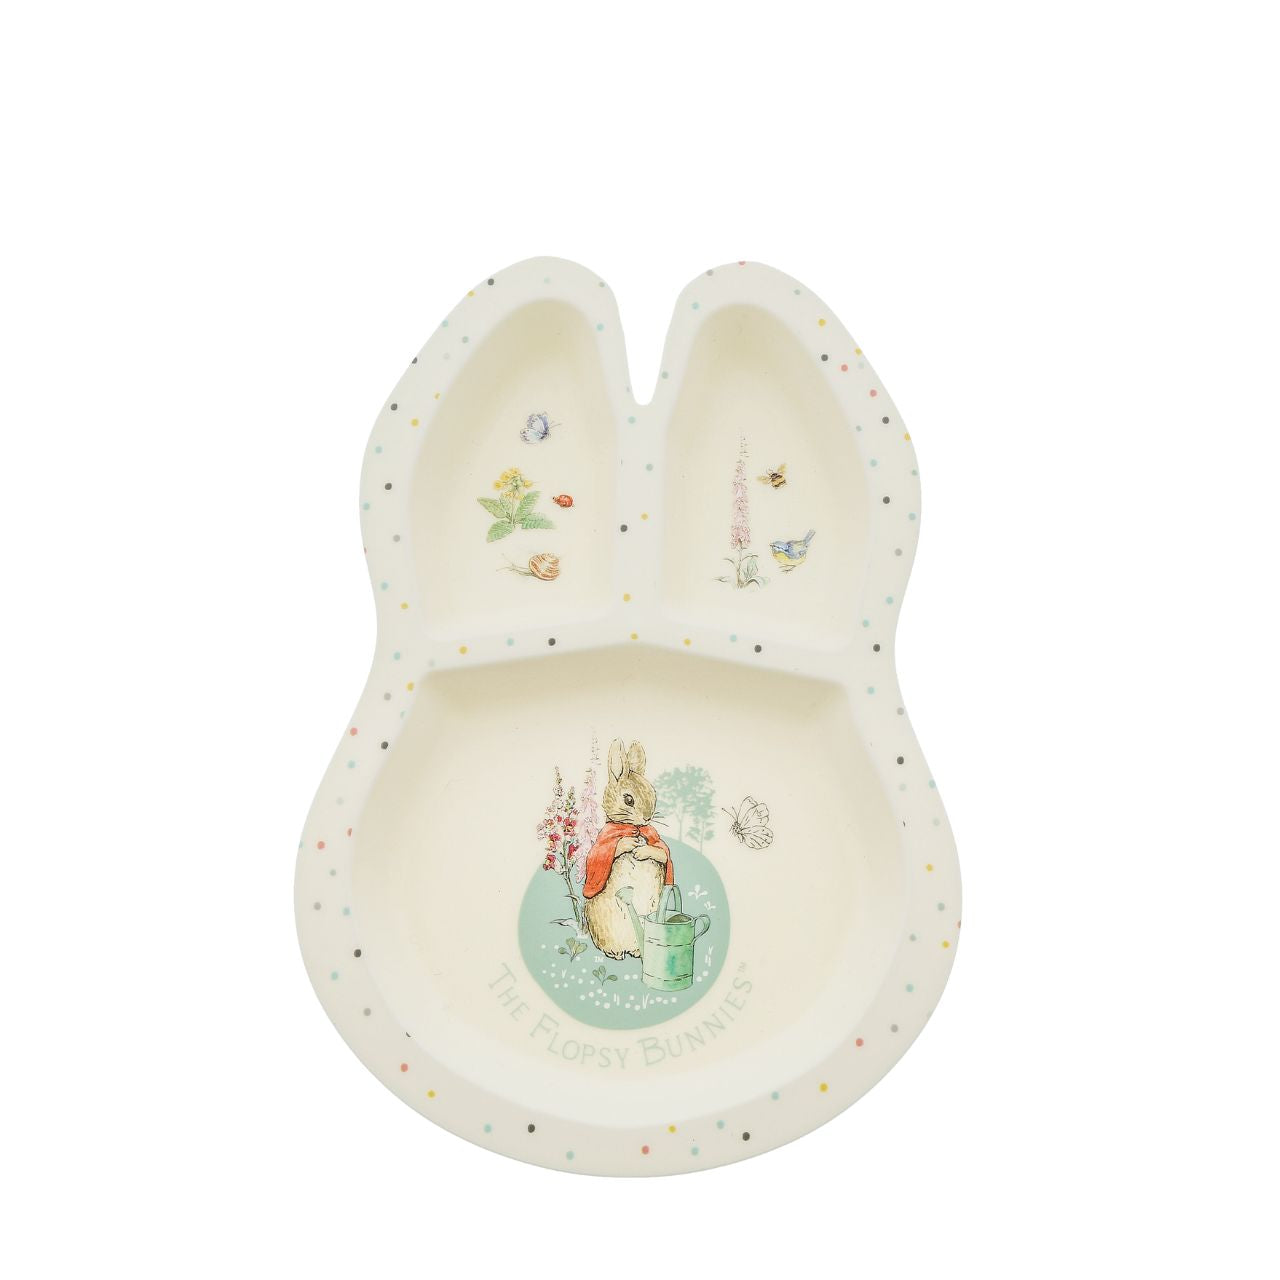 Peter Rabbit Flopsy Dinner Set  Introducing this brand new at home with Peter Rabbit collection. There's nothing quite like a fun Flopsy motif to entice those little tummies to clear their plates. Make mealtimes fun and practical with this dinner set. This highly durable dinner set can be used at home, in the garden, or on the go.